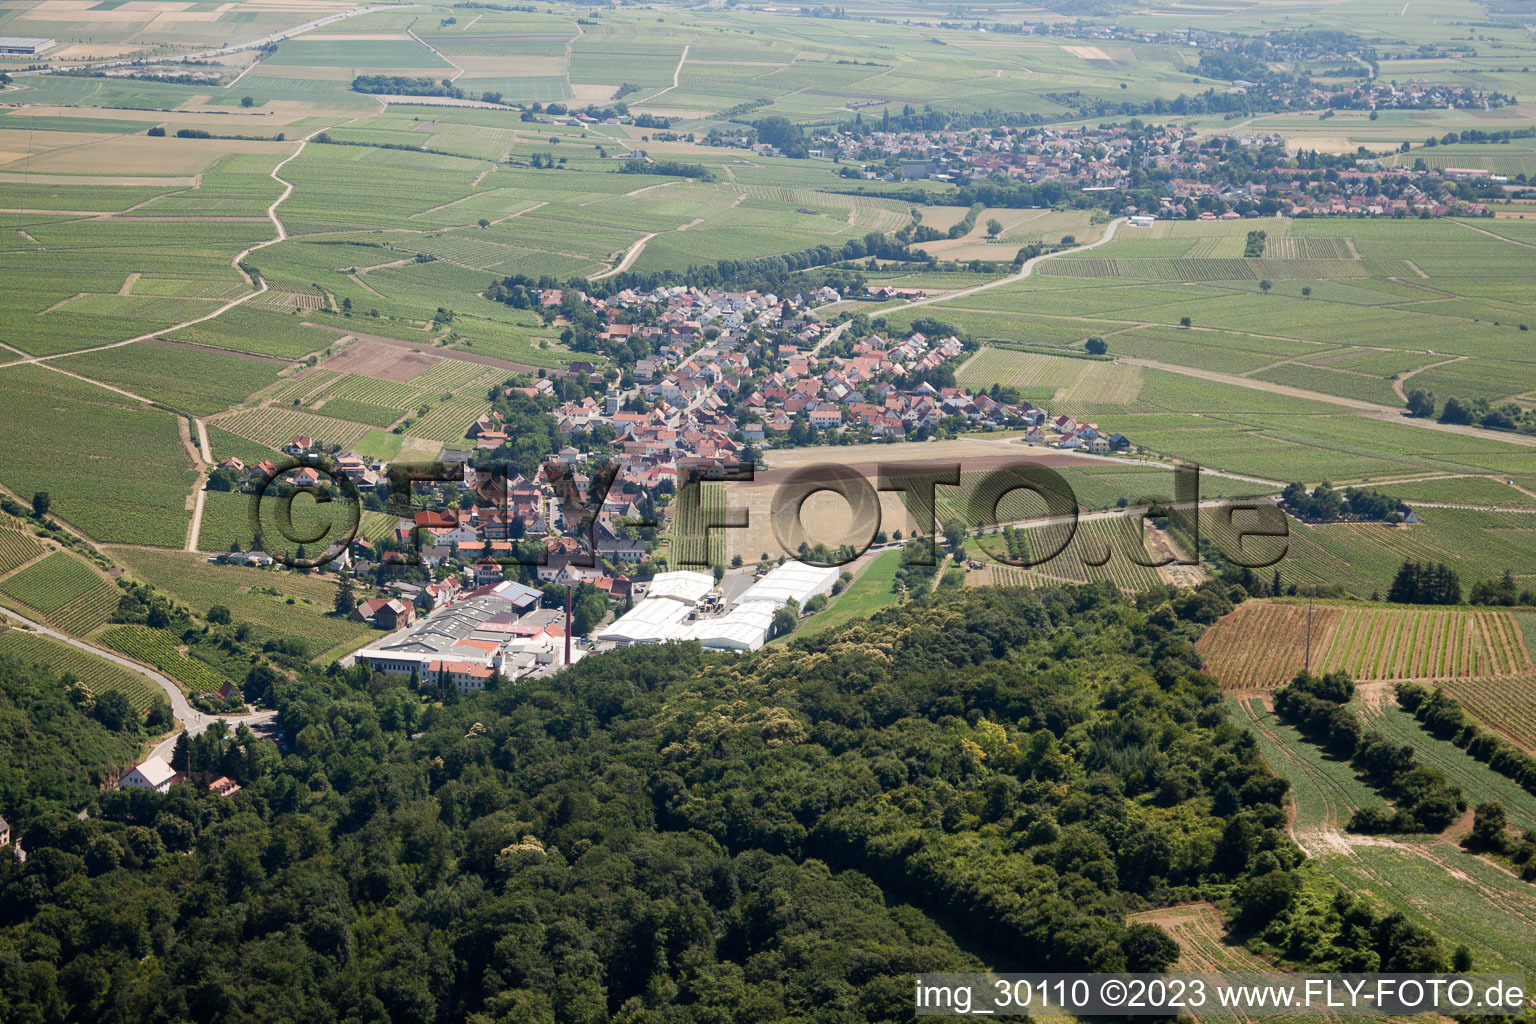 From the west in Kleinkarlbach in the state Rhineland-Palatinate, Germany